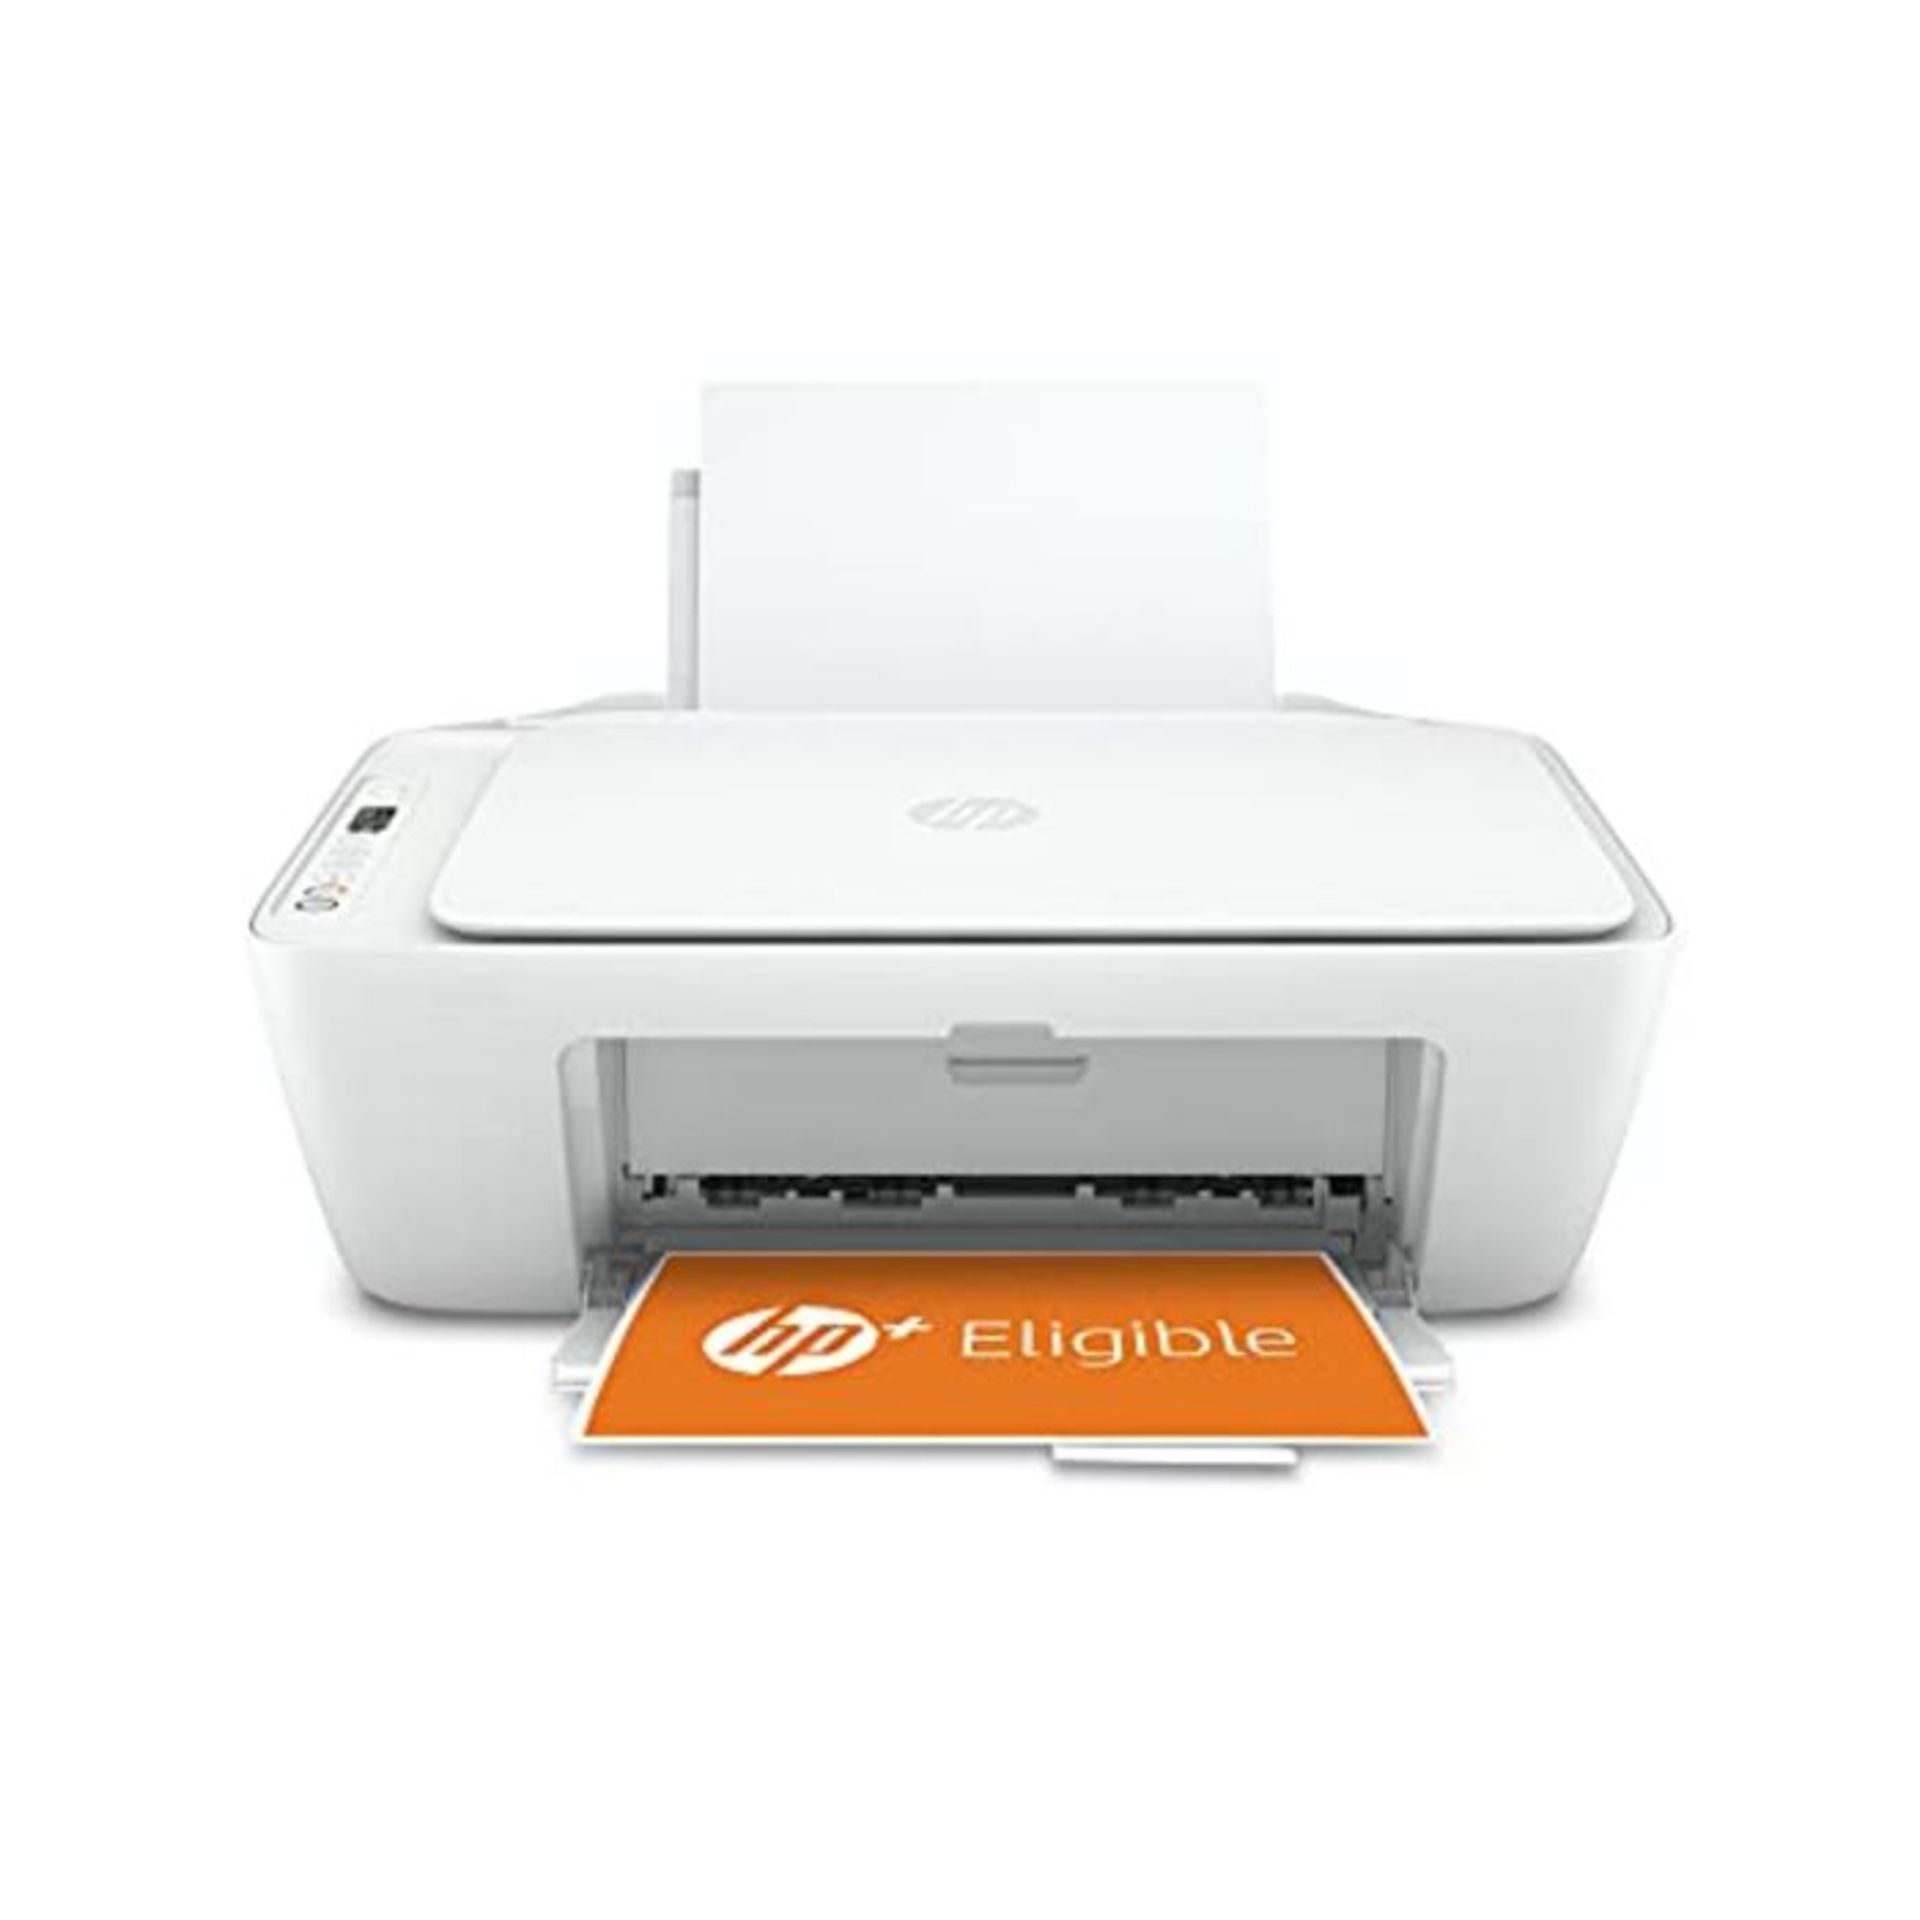 HP DeskJet 2710e All-In-One Colour Printer with 6 Months of Instant Ink with HP+